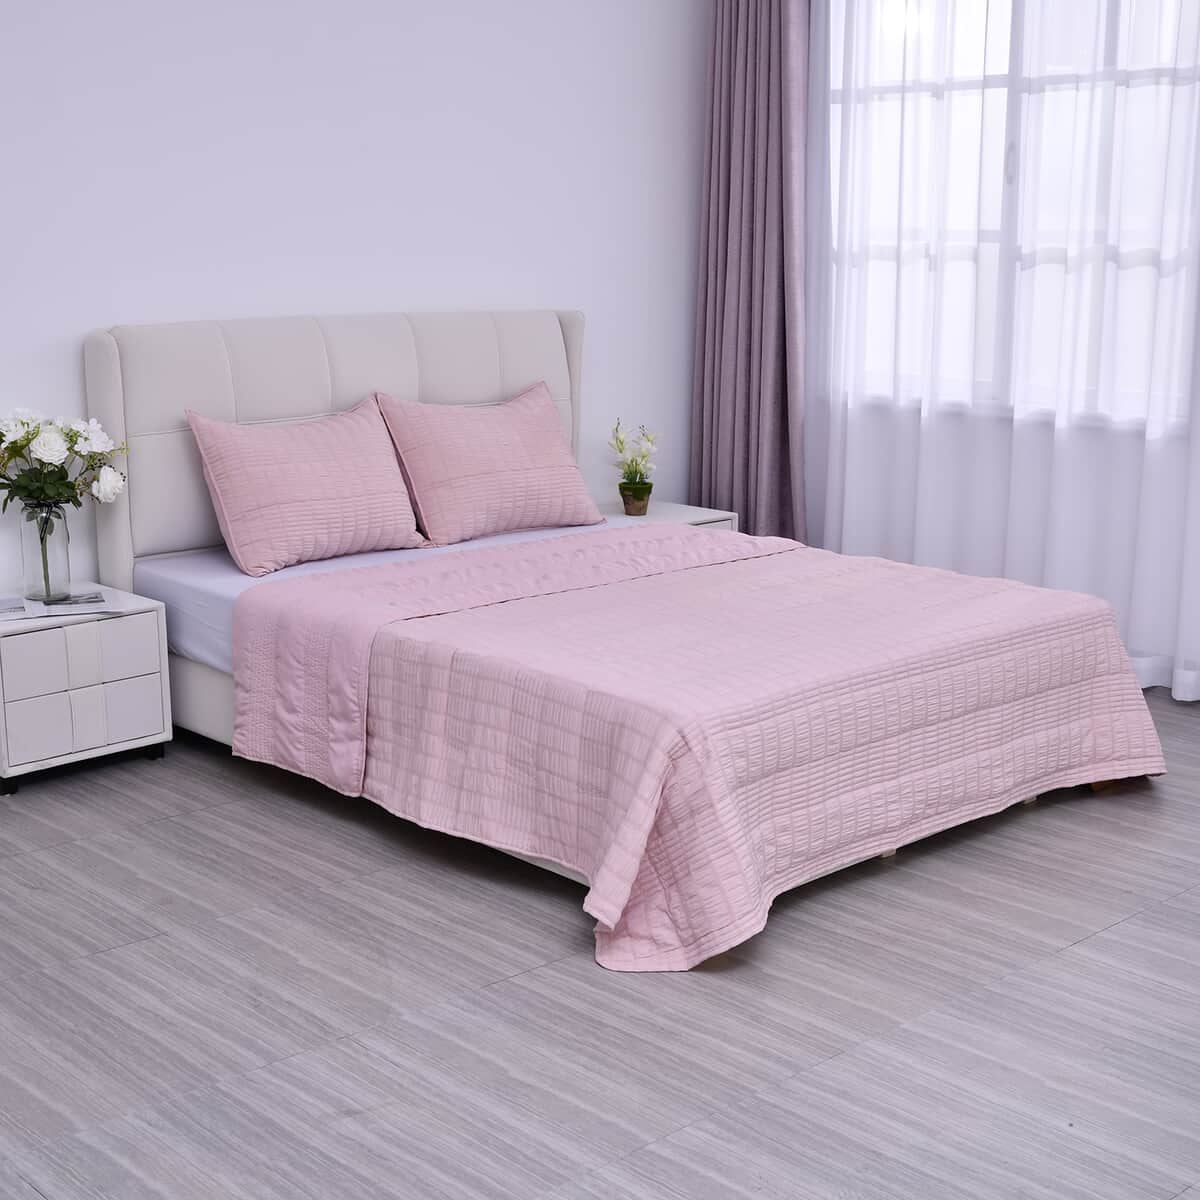 Homesmart Pink Striped Queen Size Microfiber Quilt With Set of Shams image number 0